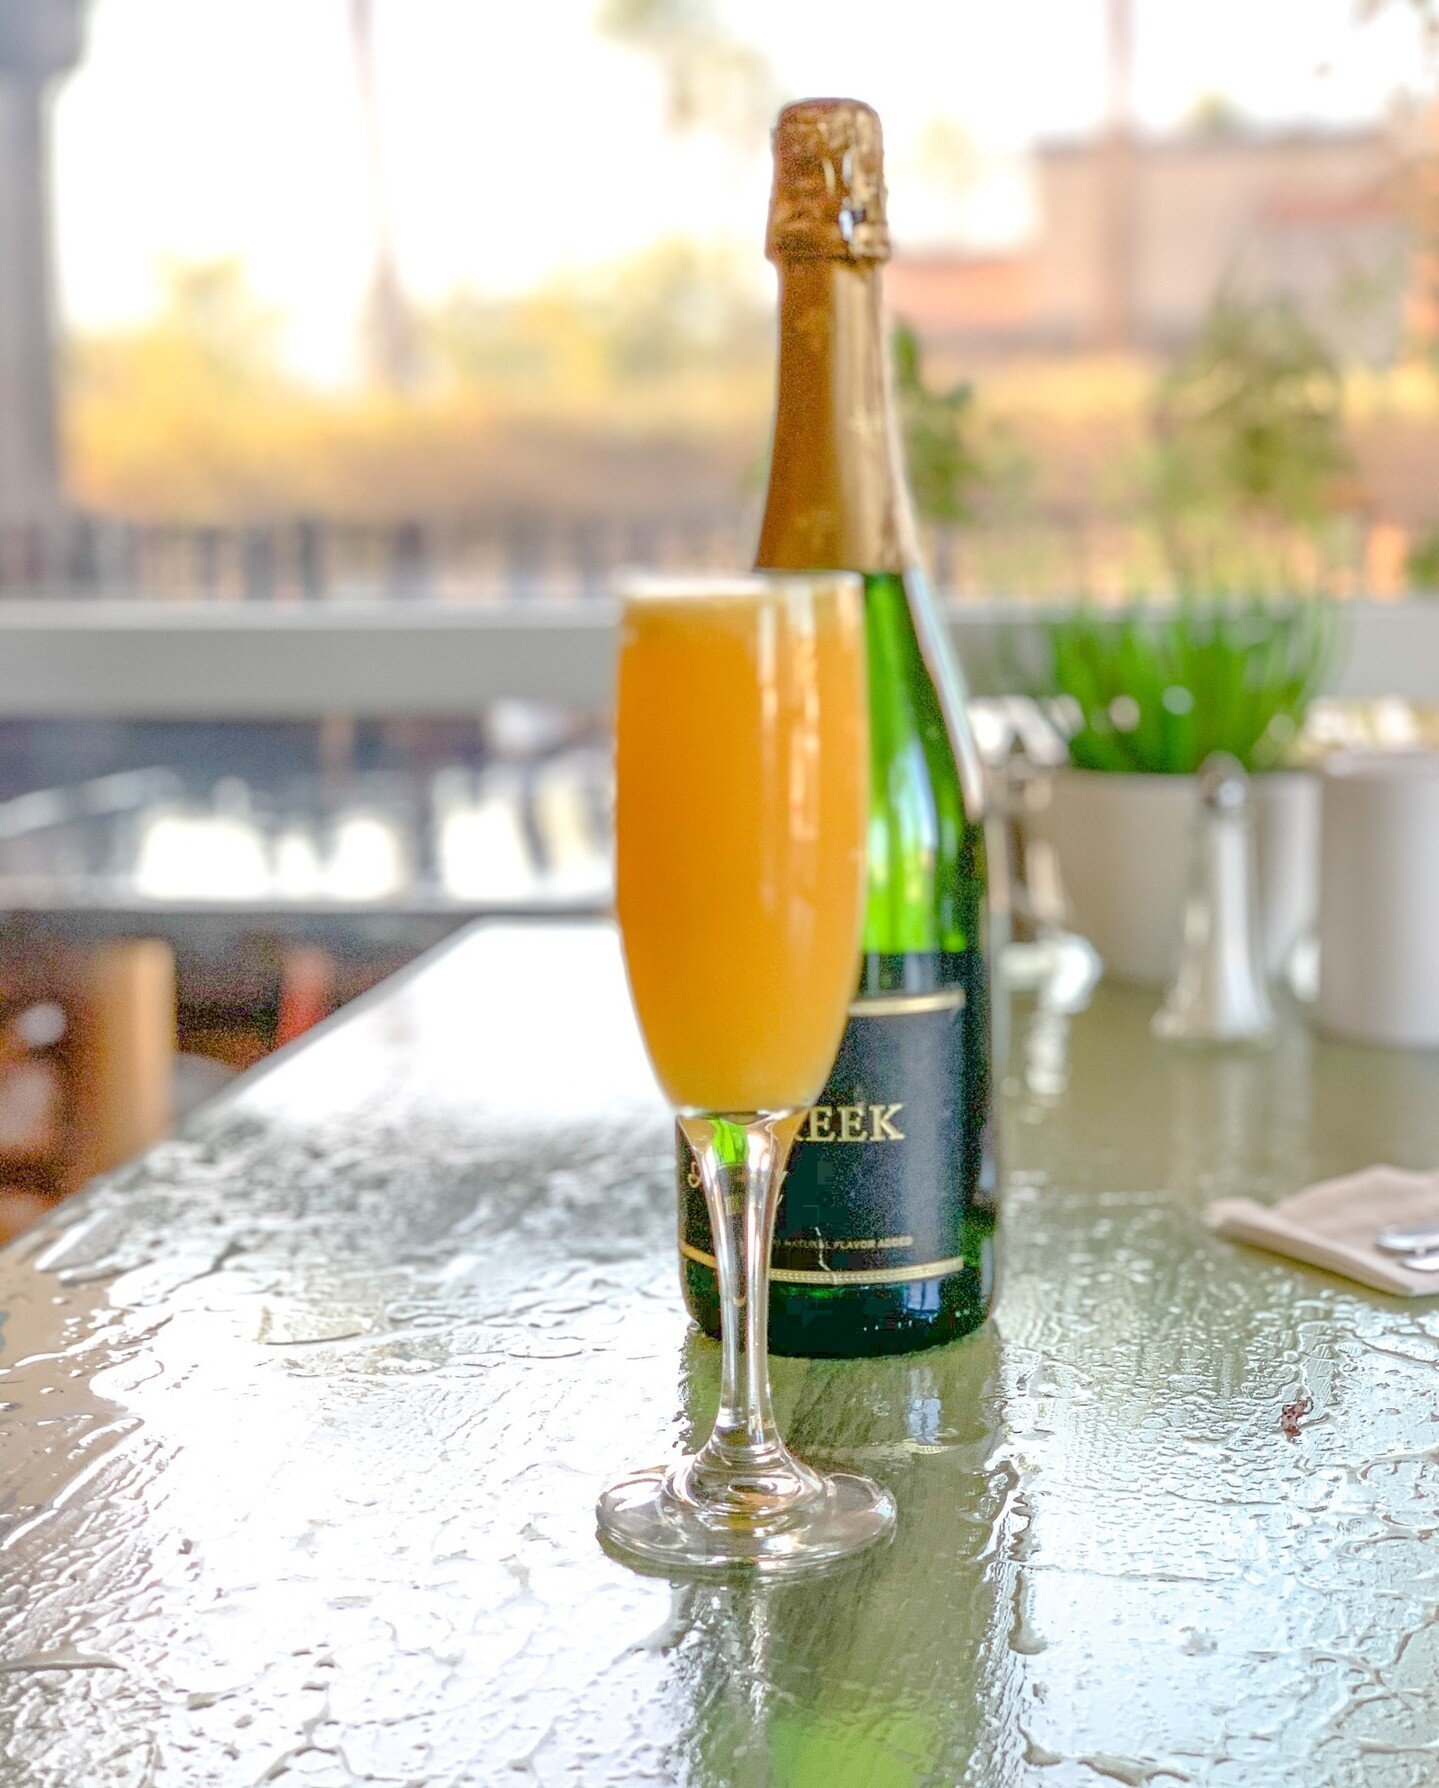 Ready to cheers to National Mimosa Day! 🥂 Come let us fill your glasses at Cups Cafe!